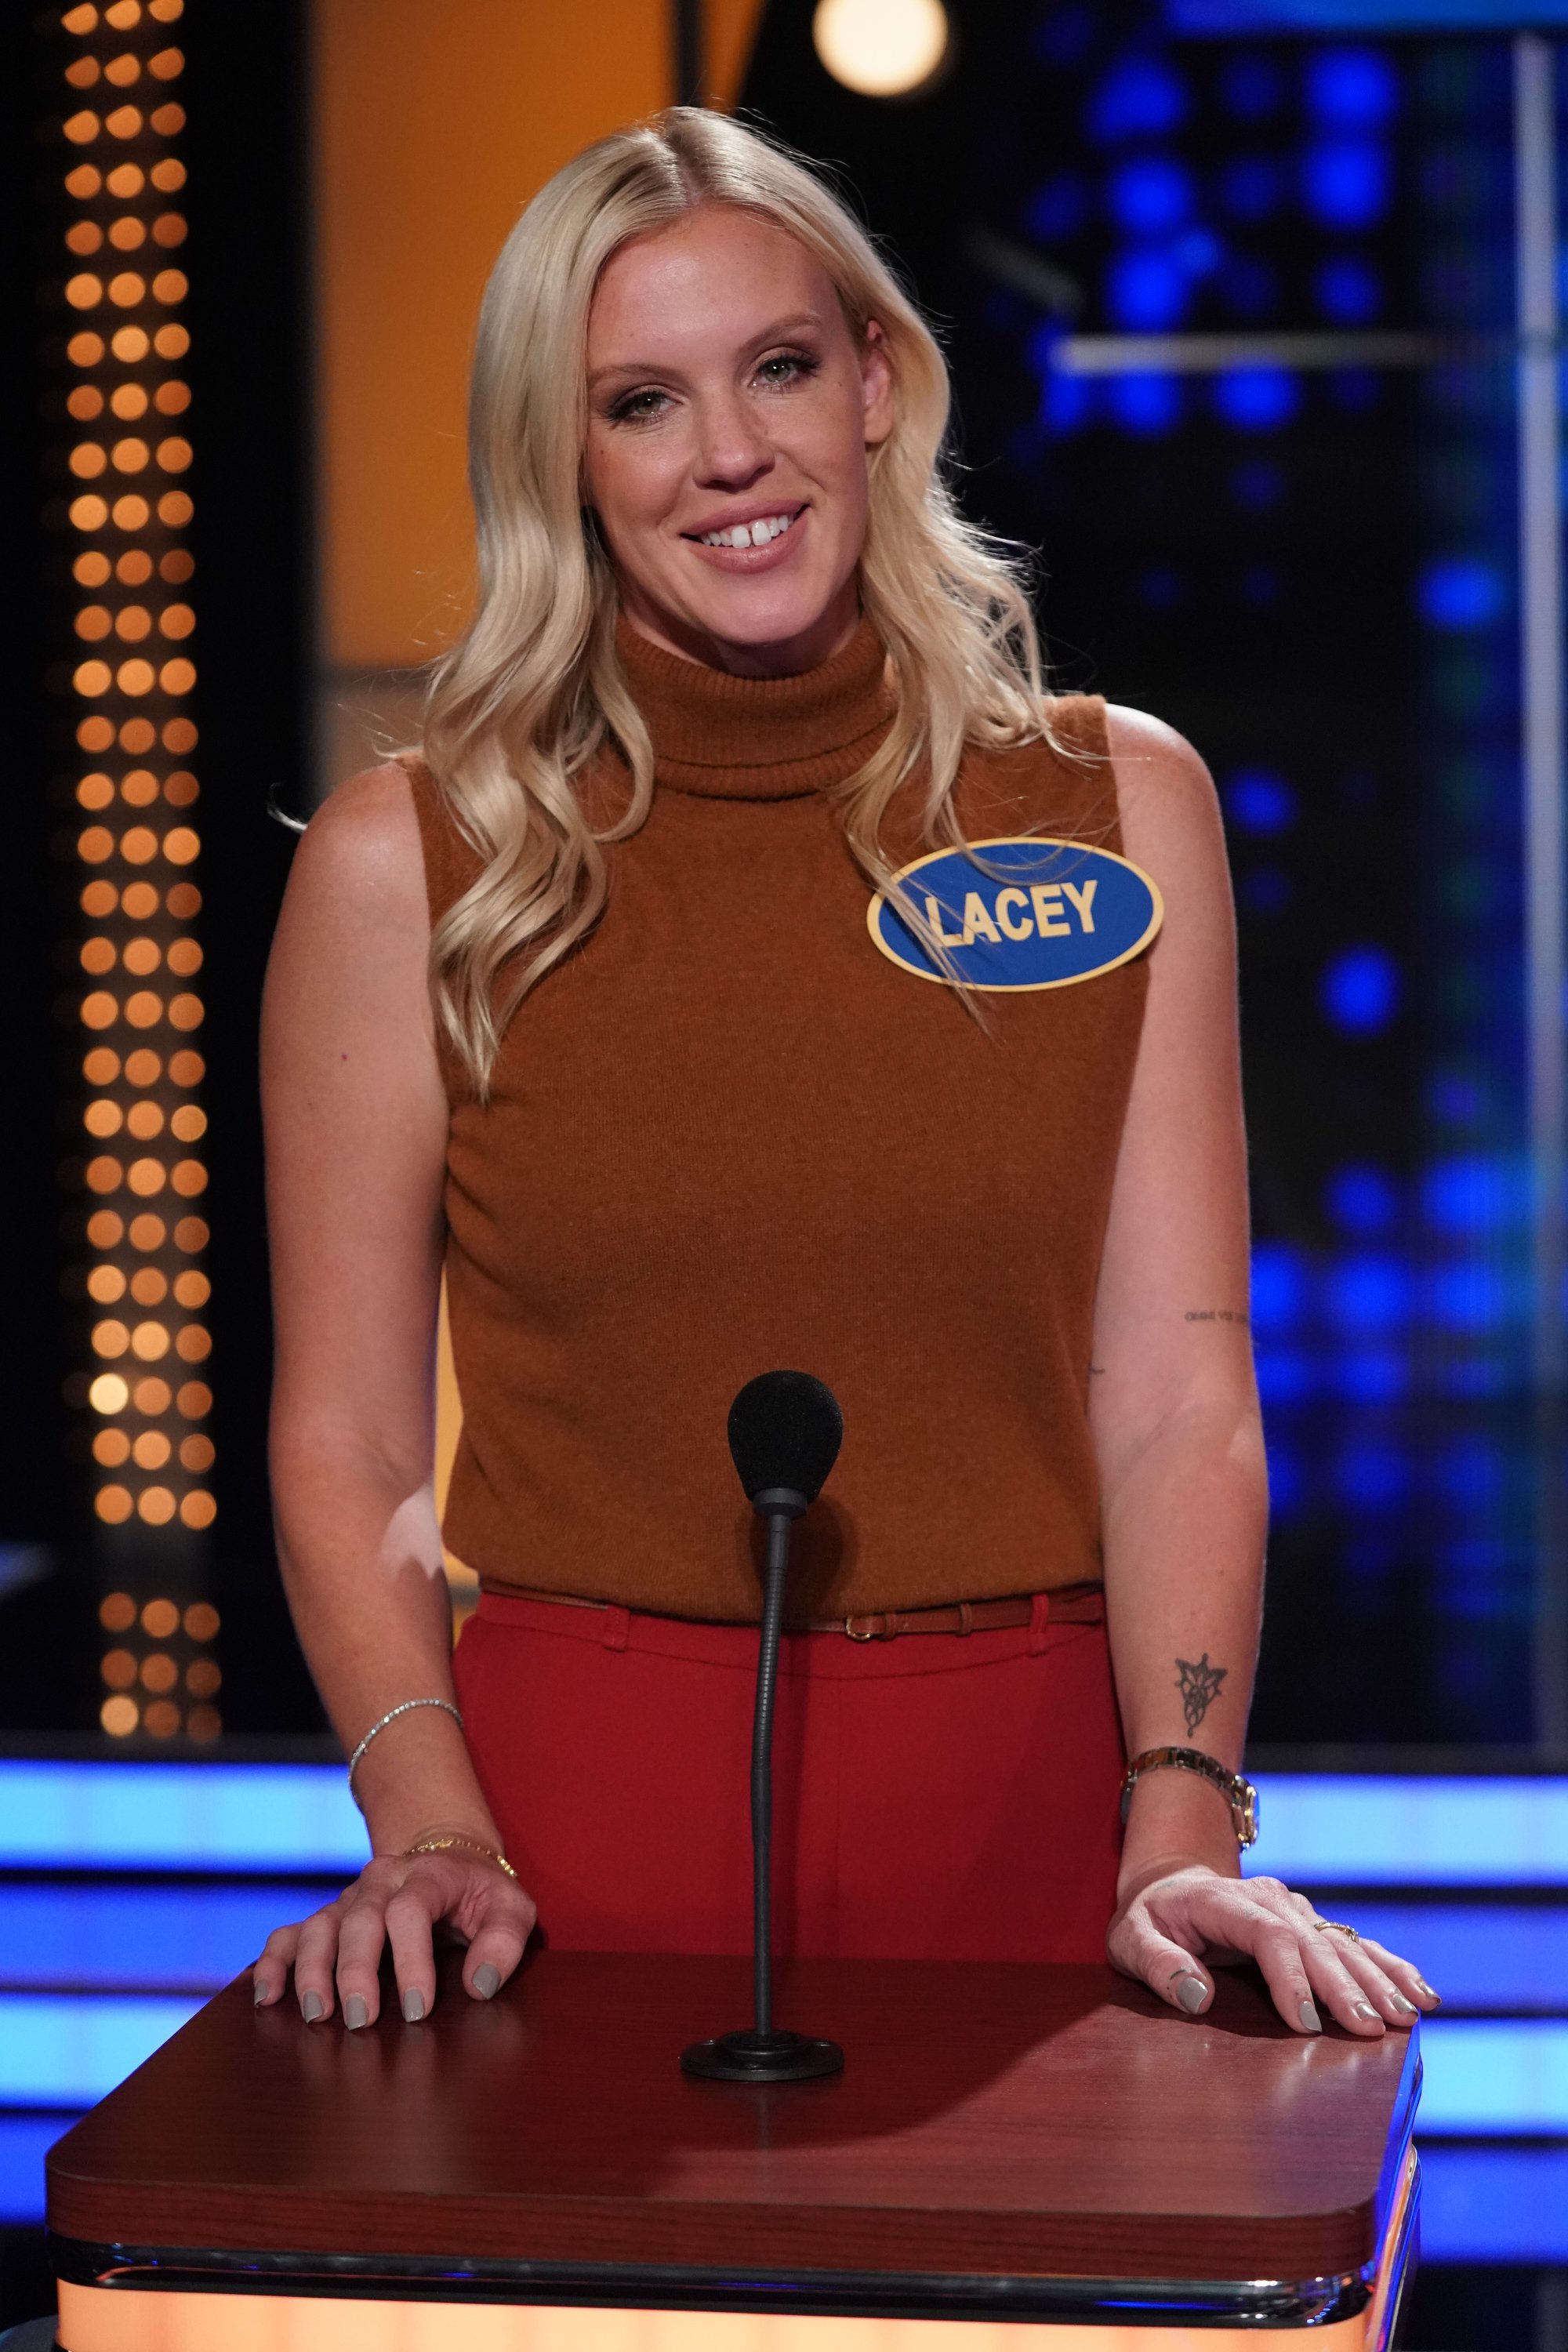 Lacey Hester on ABC's "Celebrity Family Feud" in 2021. | Source: Getty Images